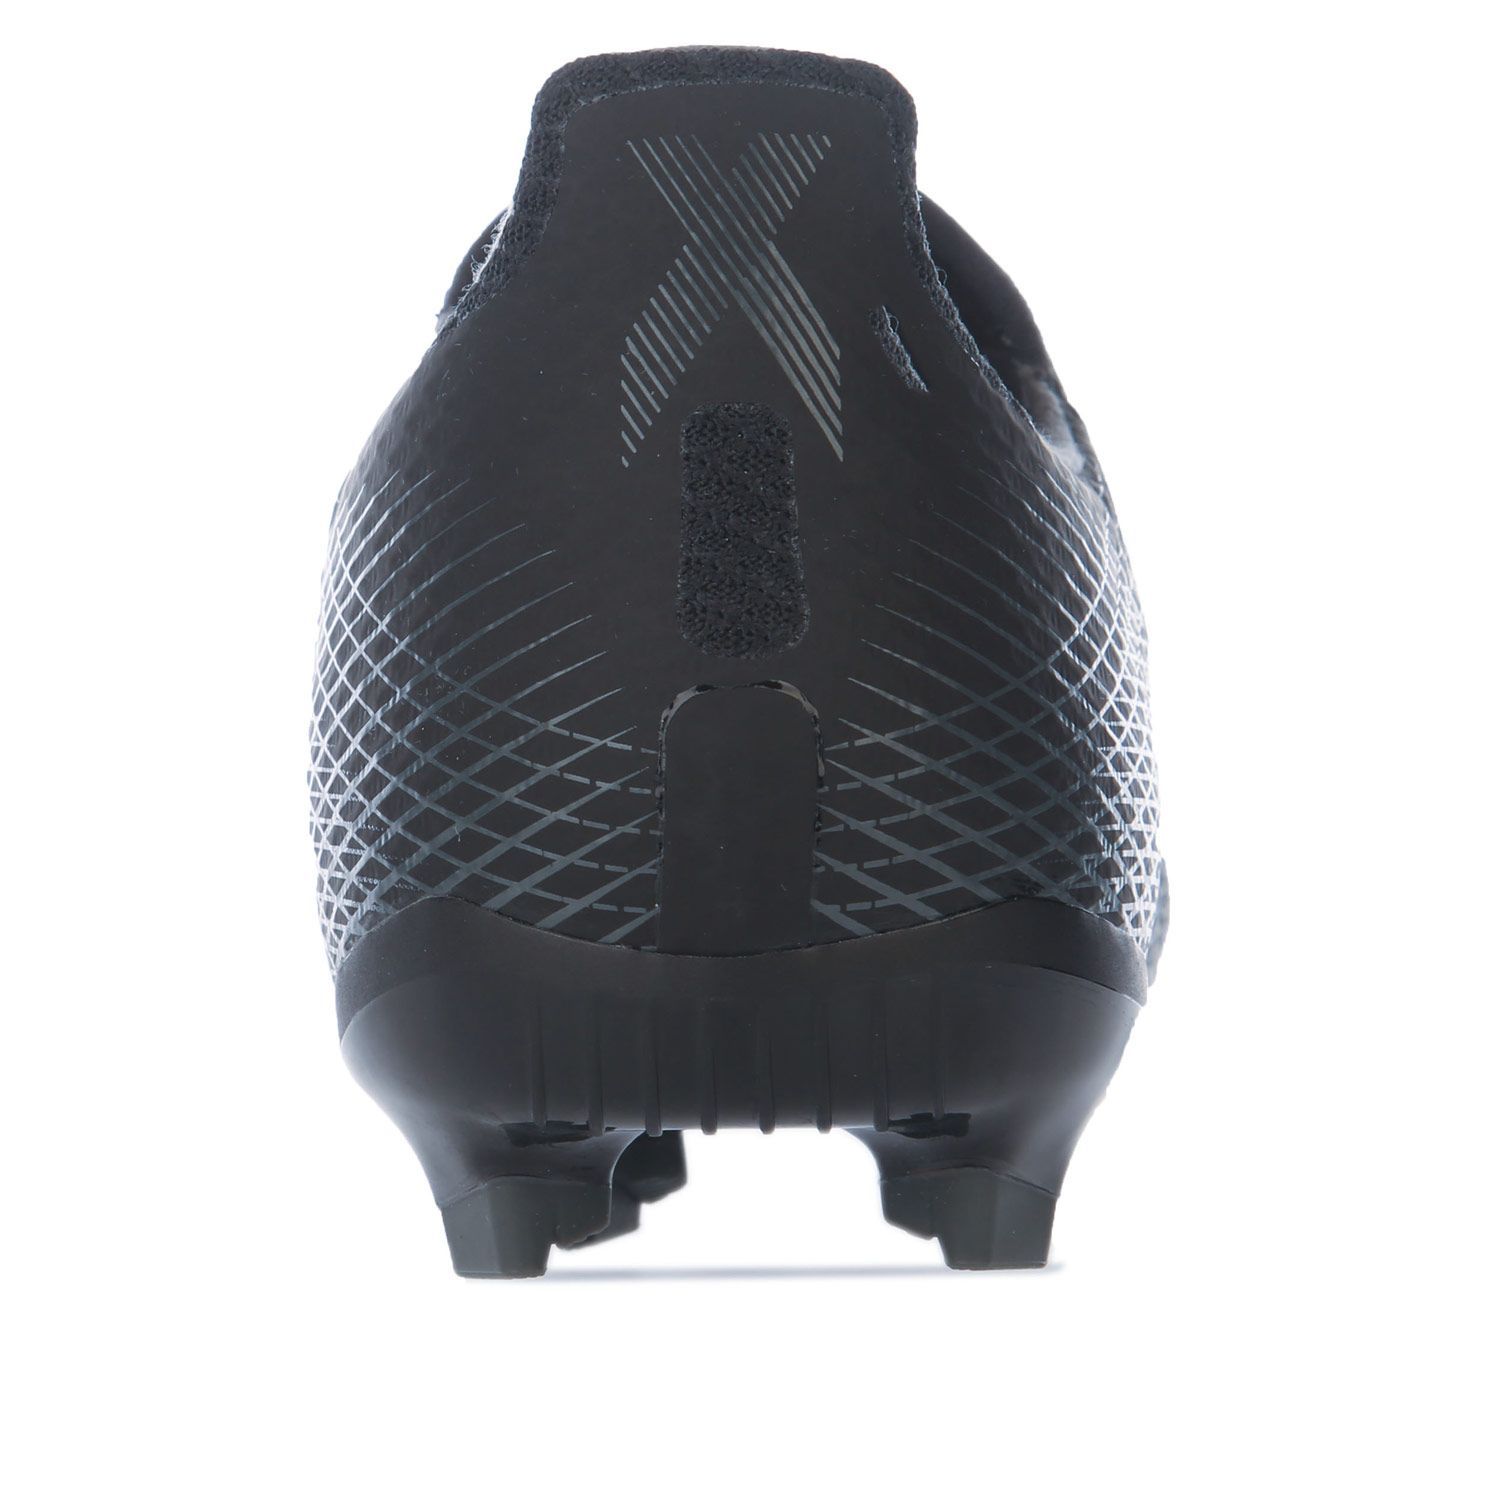 Junior Boys adidas X Ghosted.3 FG Football Boots in black.- Engineered mesh upper.- Lace fastening.- Four- way stretch material.- Stretchy tongue.- Firm ground.- 3 stripe detail to side.- TPU firm ground outsole.- Textile and synthetic lining  Synthetic sole.- Ref.: FW3545J